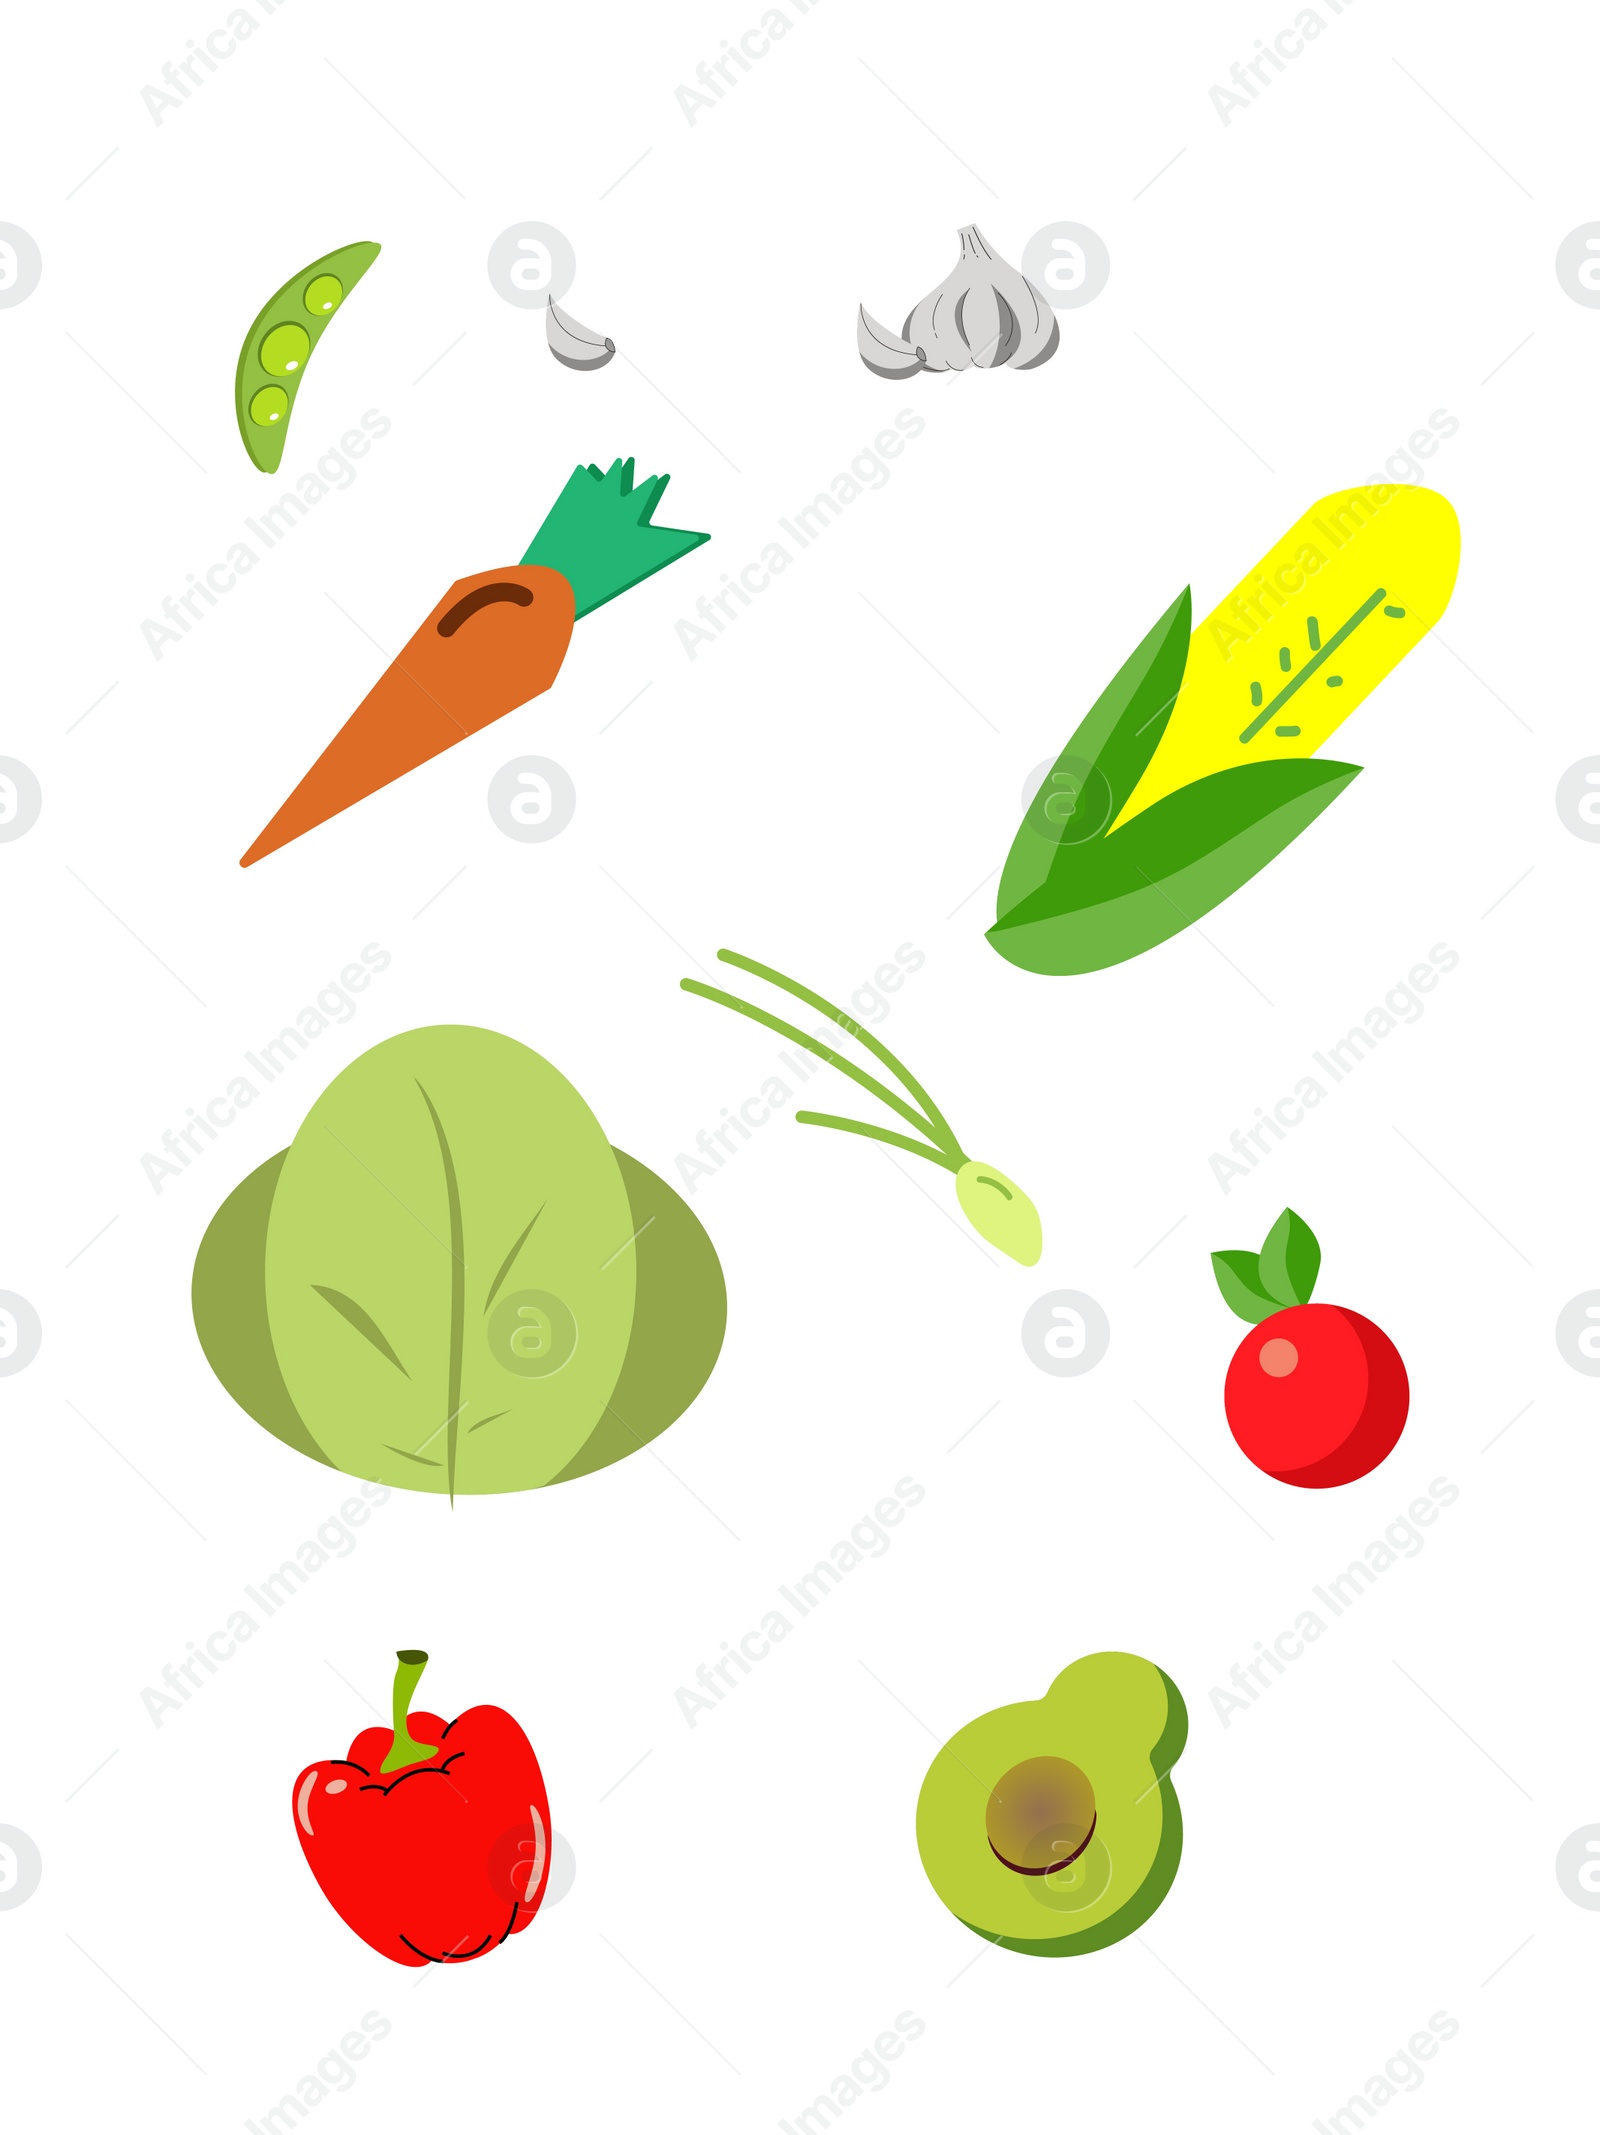 Illustration of Illustrations of healthy food on white background. Nutritionist's recommendations